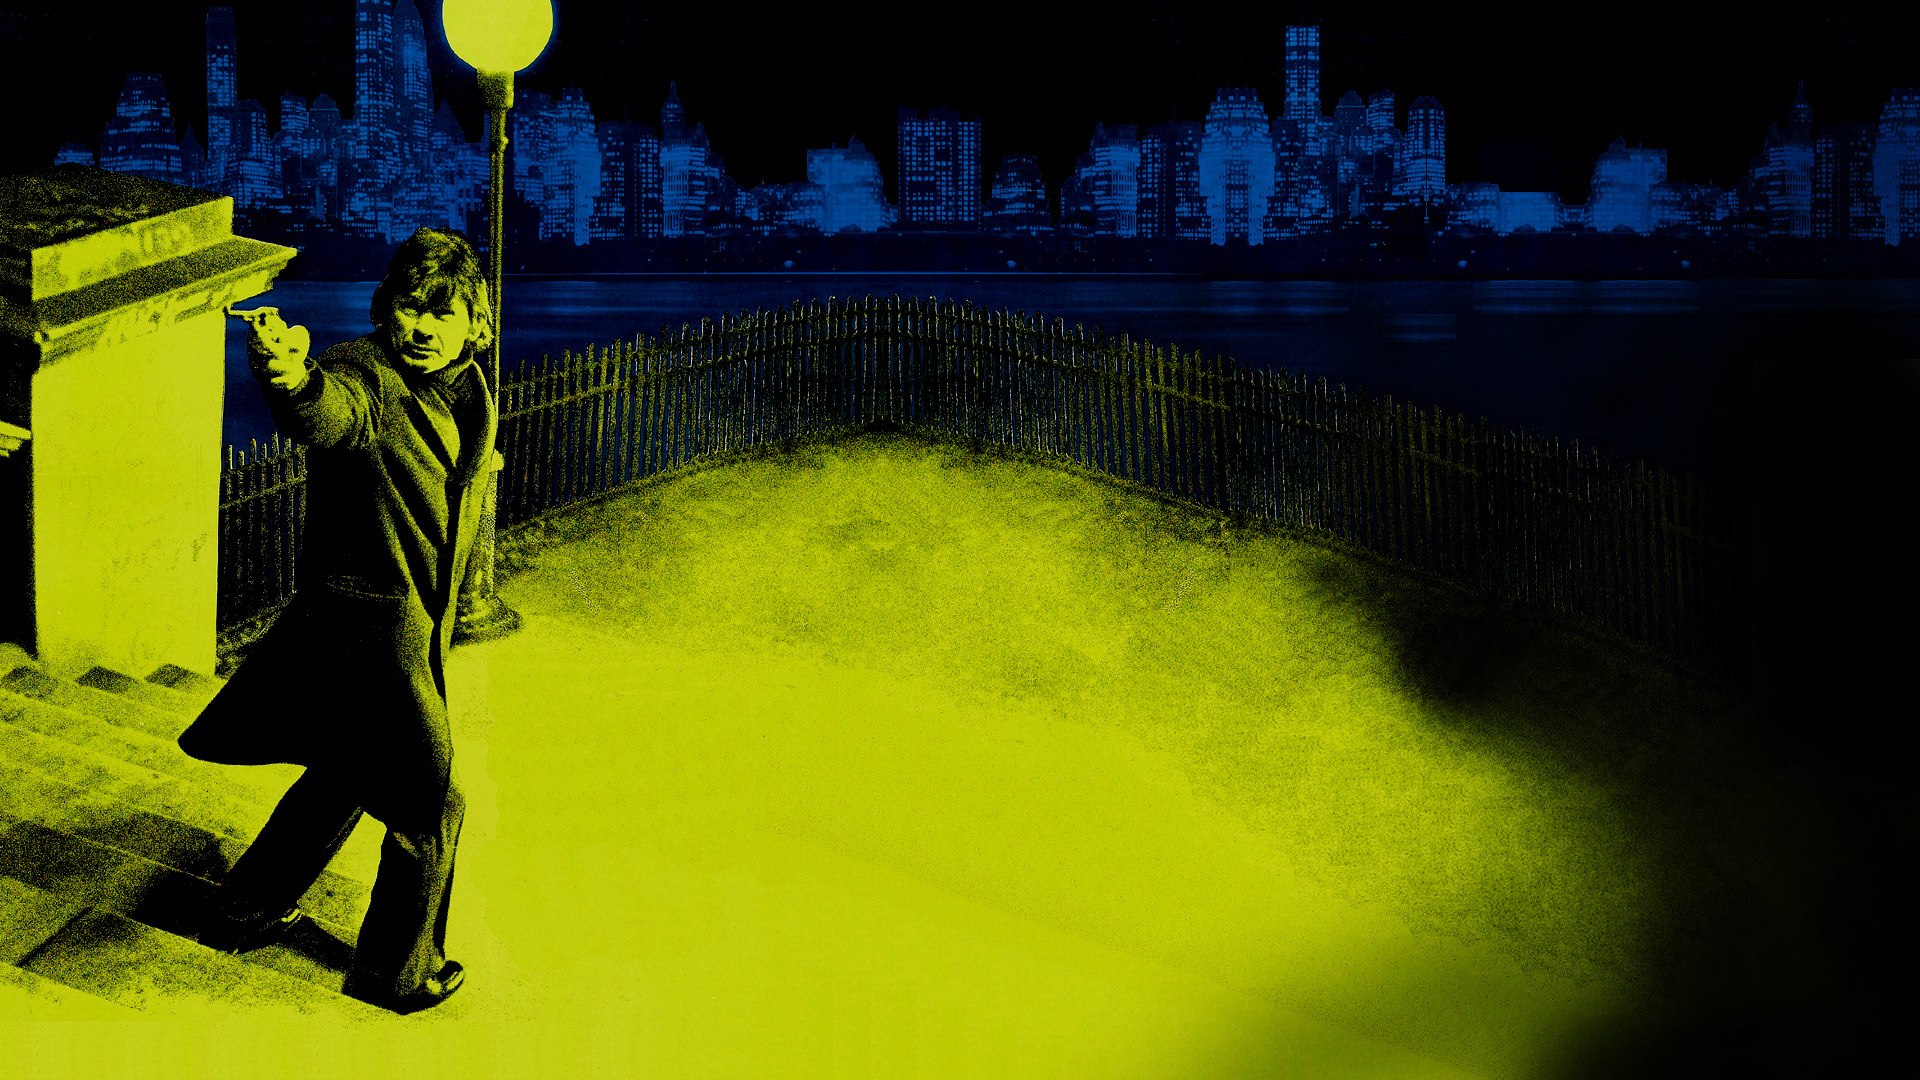 deathwish wallpaper,yellow,illustration,fictional character,photography,graphic design